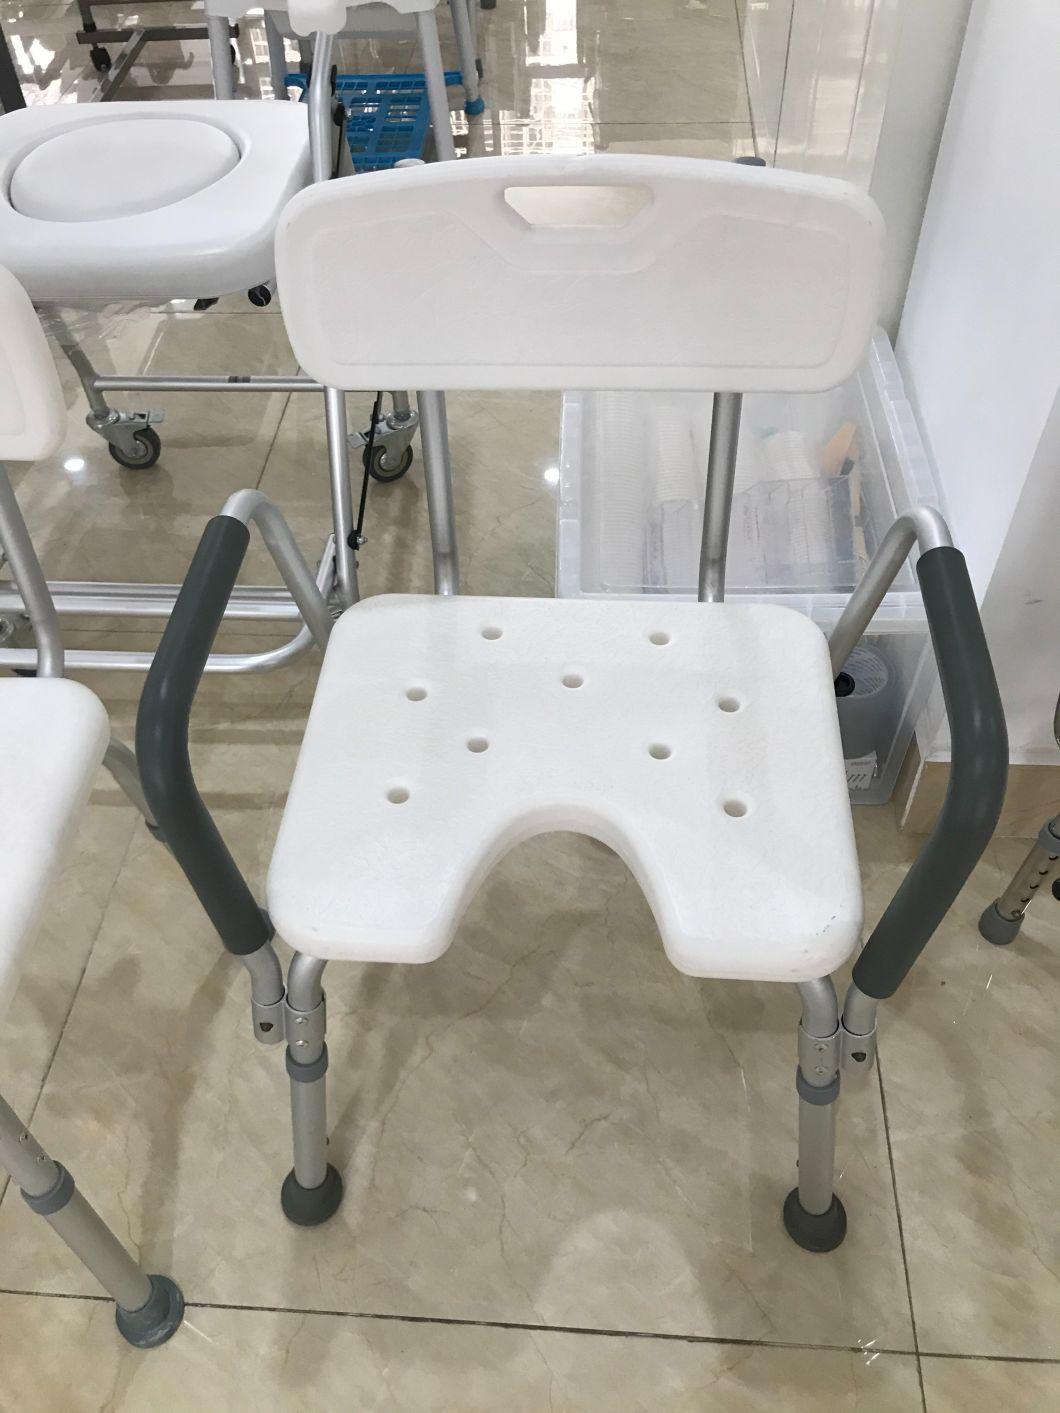 Customized Brother Medical Wheel Chair Seat Bench with ISO Bme 350L